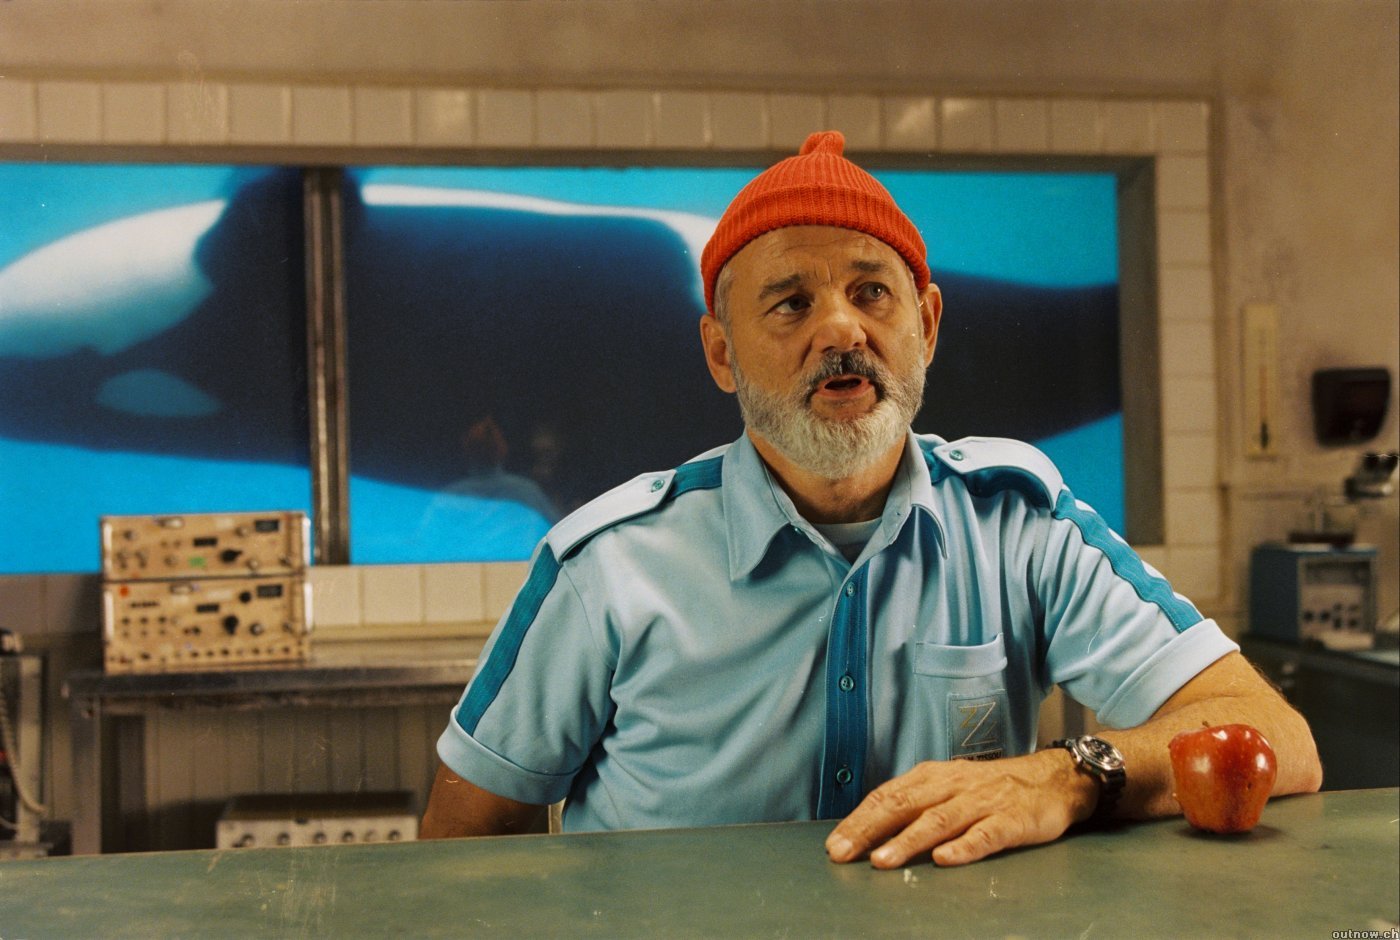 Amazing The Life Aquatic With Steve Zissou Pictures & Backgrounds